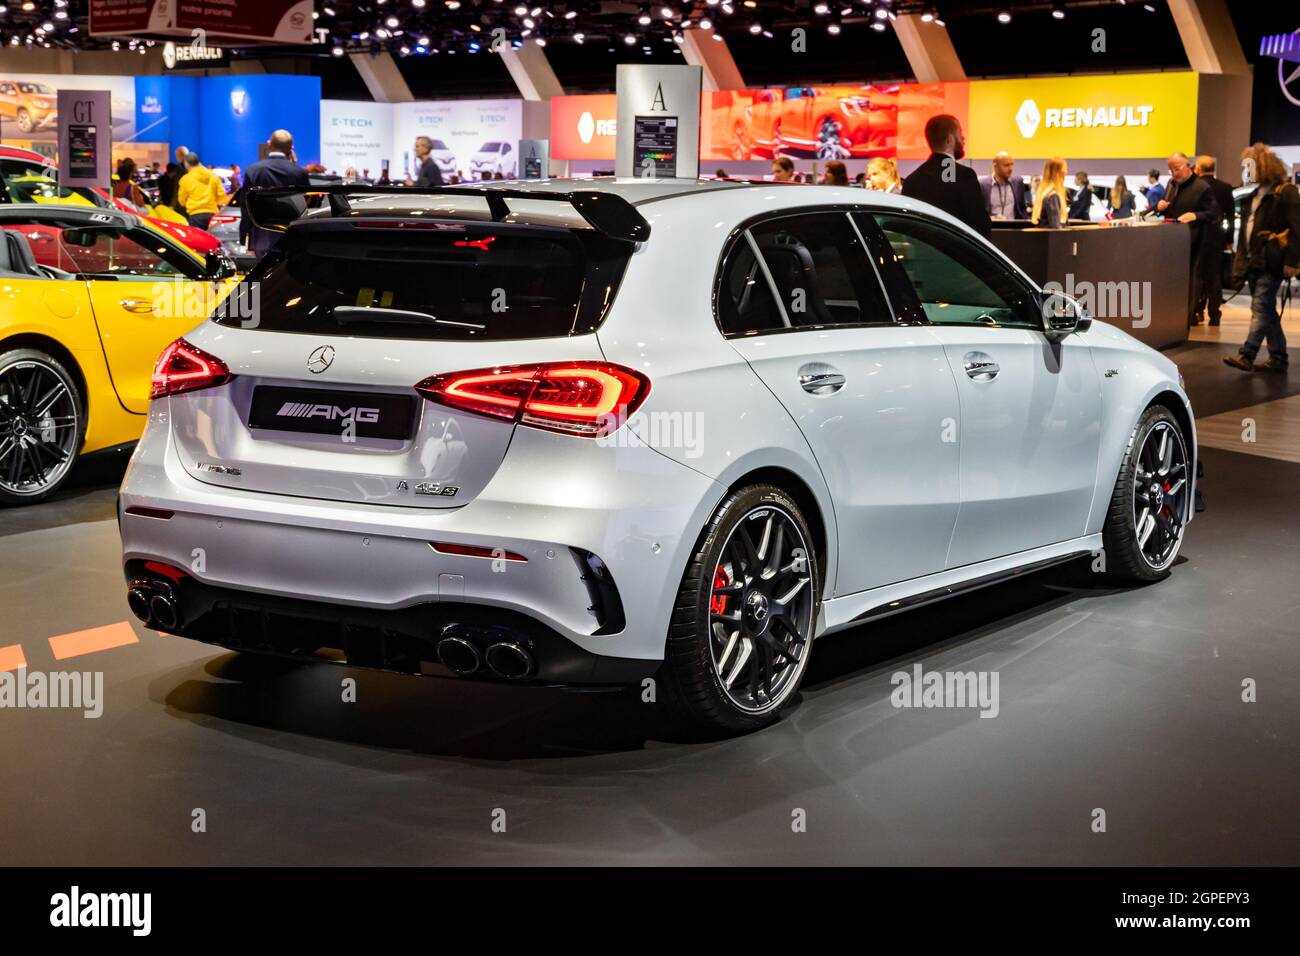 Mercedes-AMG A-class 45 S new car model shown at the Autosalon 2020 Motor Show. Brussels, Belgium - January 9, 2020. Stock Photo